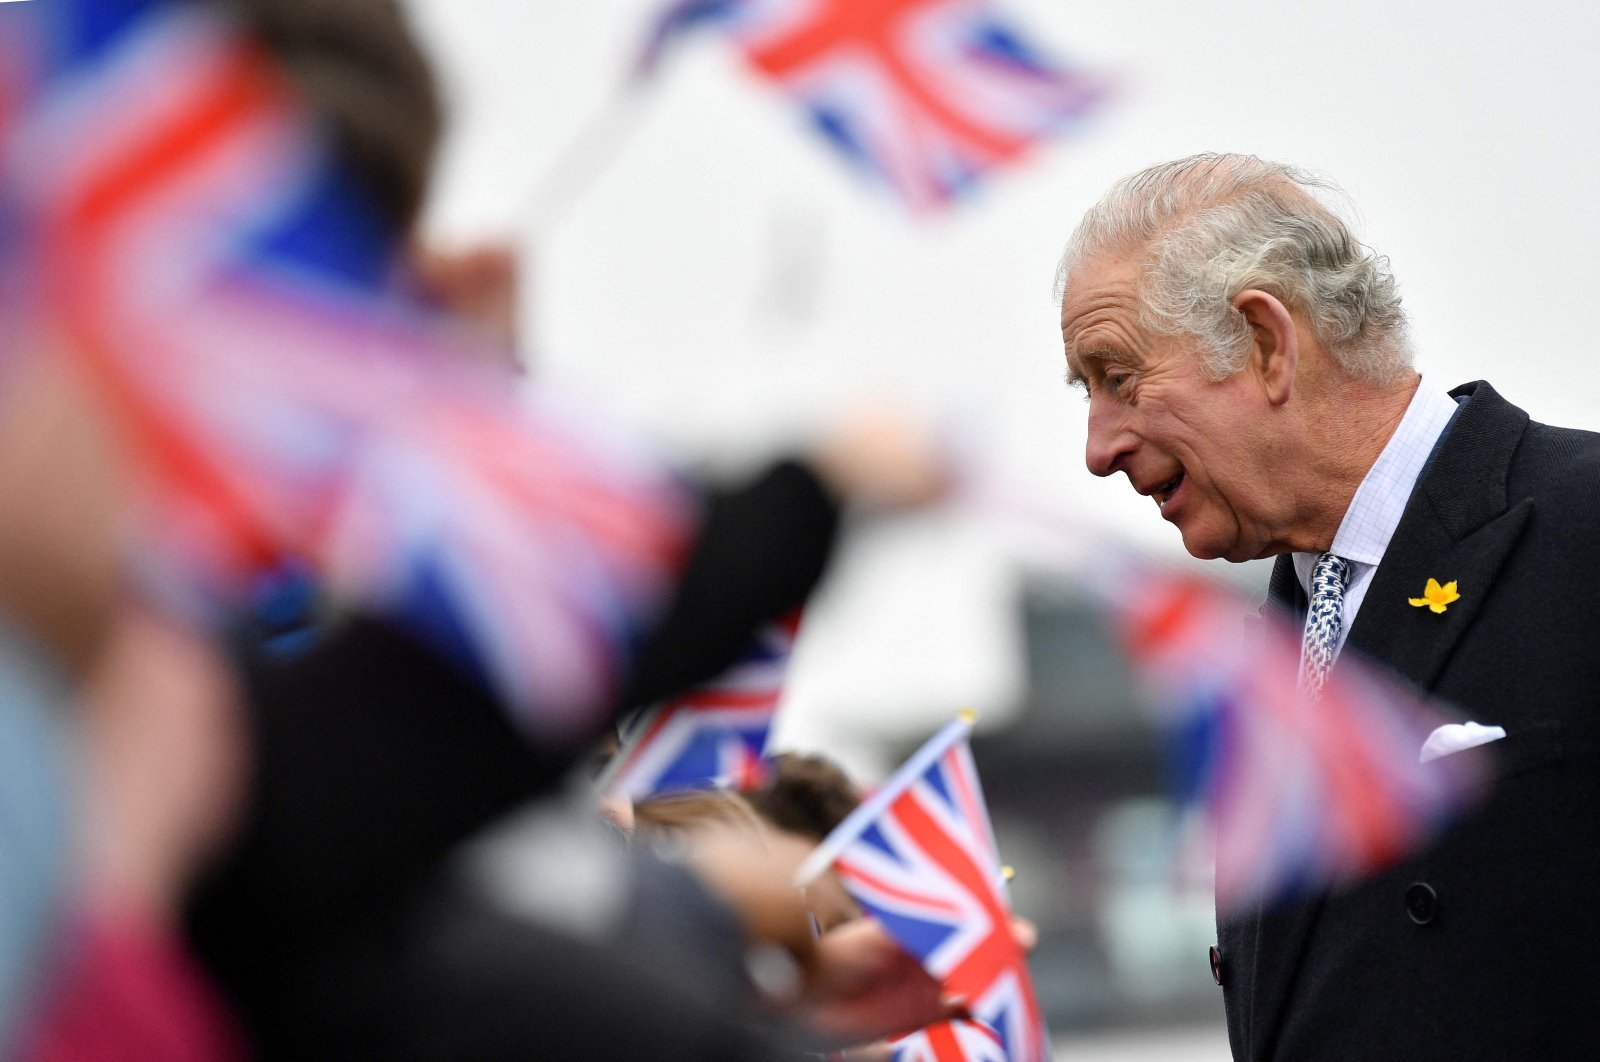 Britain’s new king is officially Charles III as money, anthems change